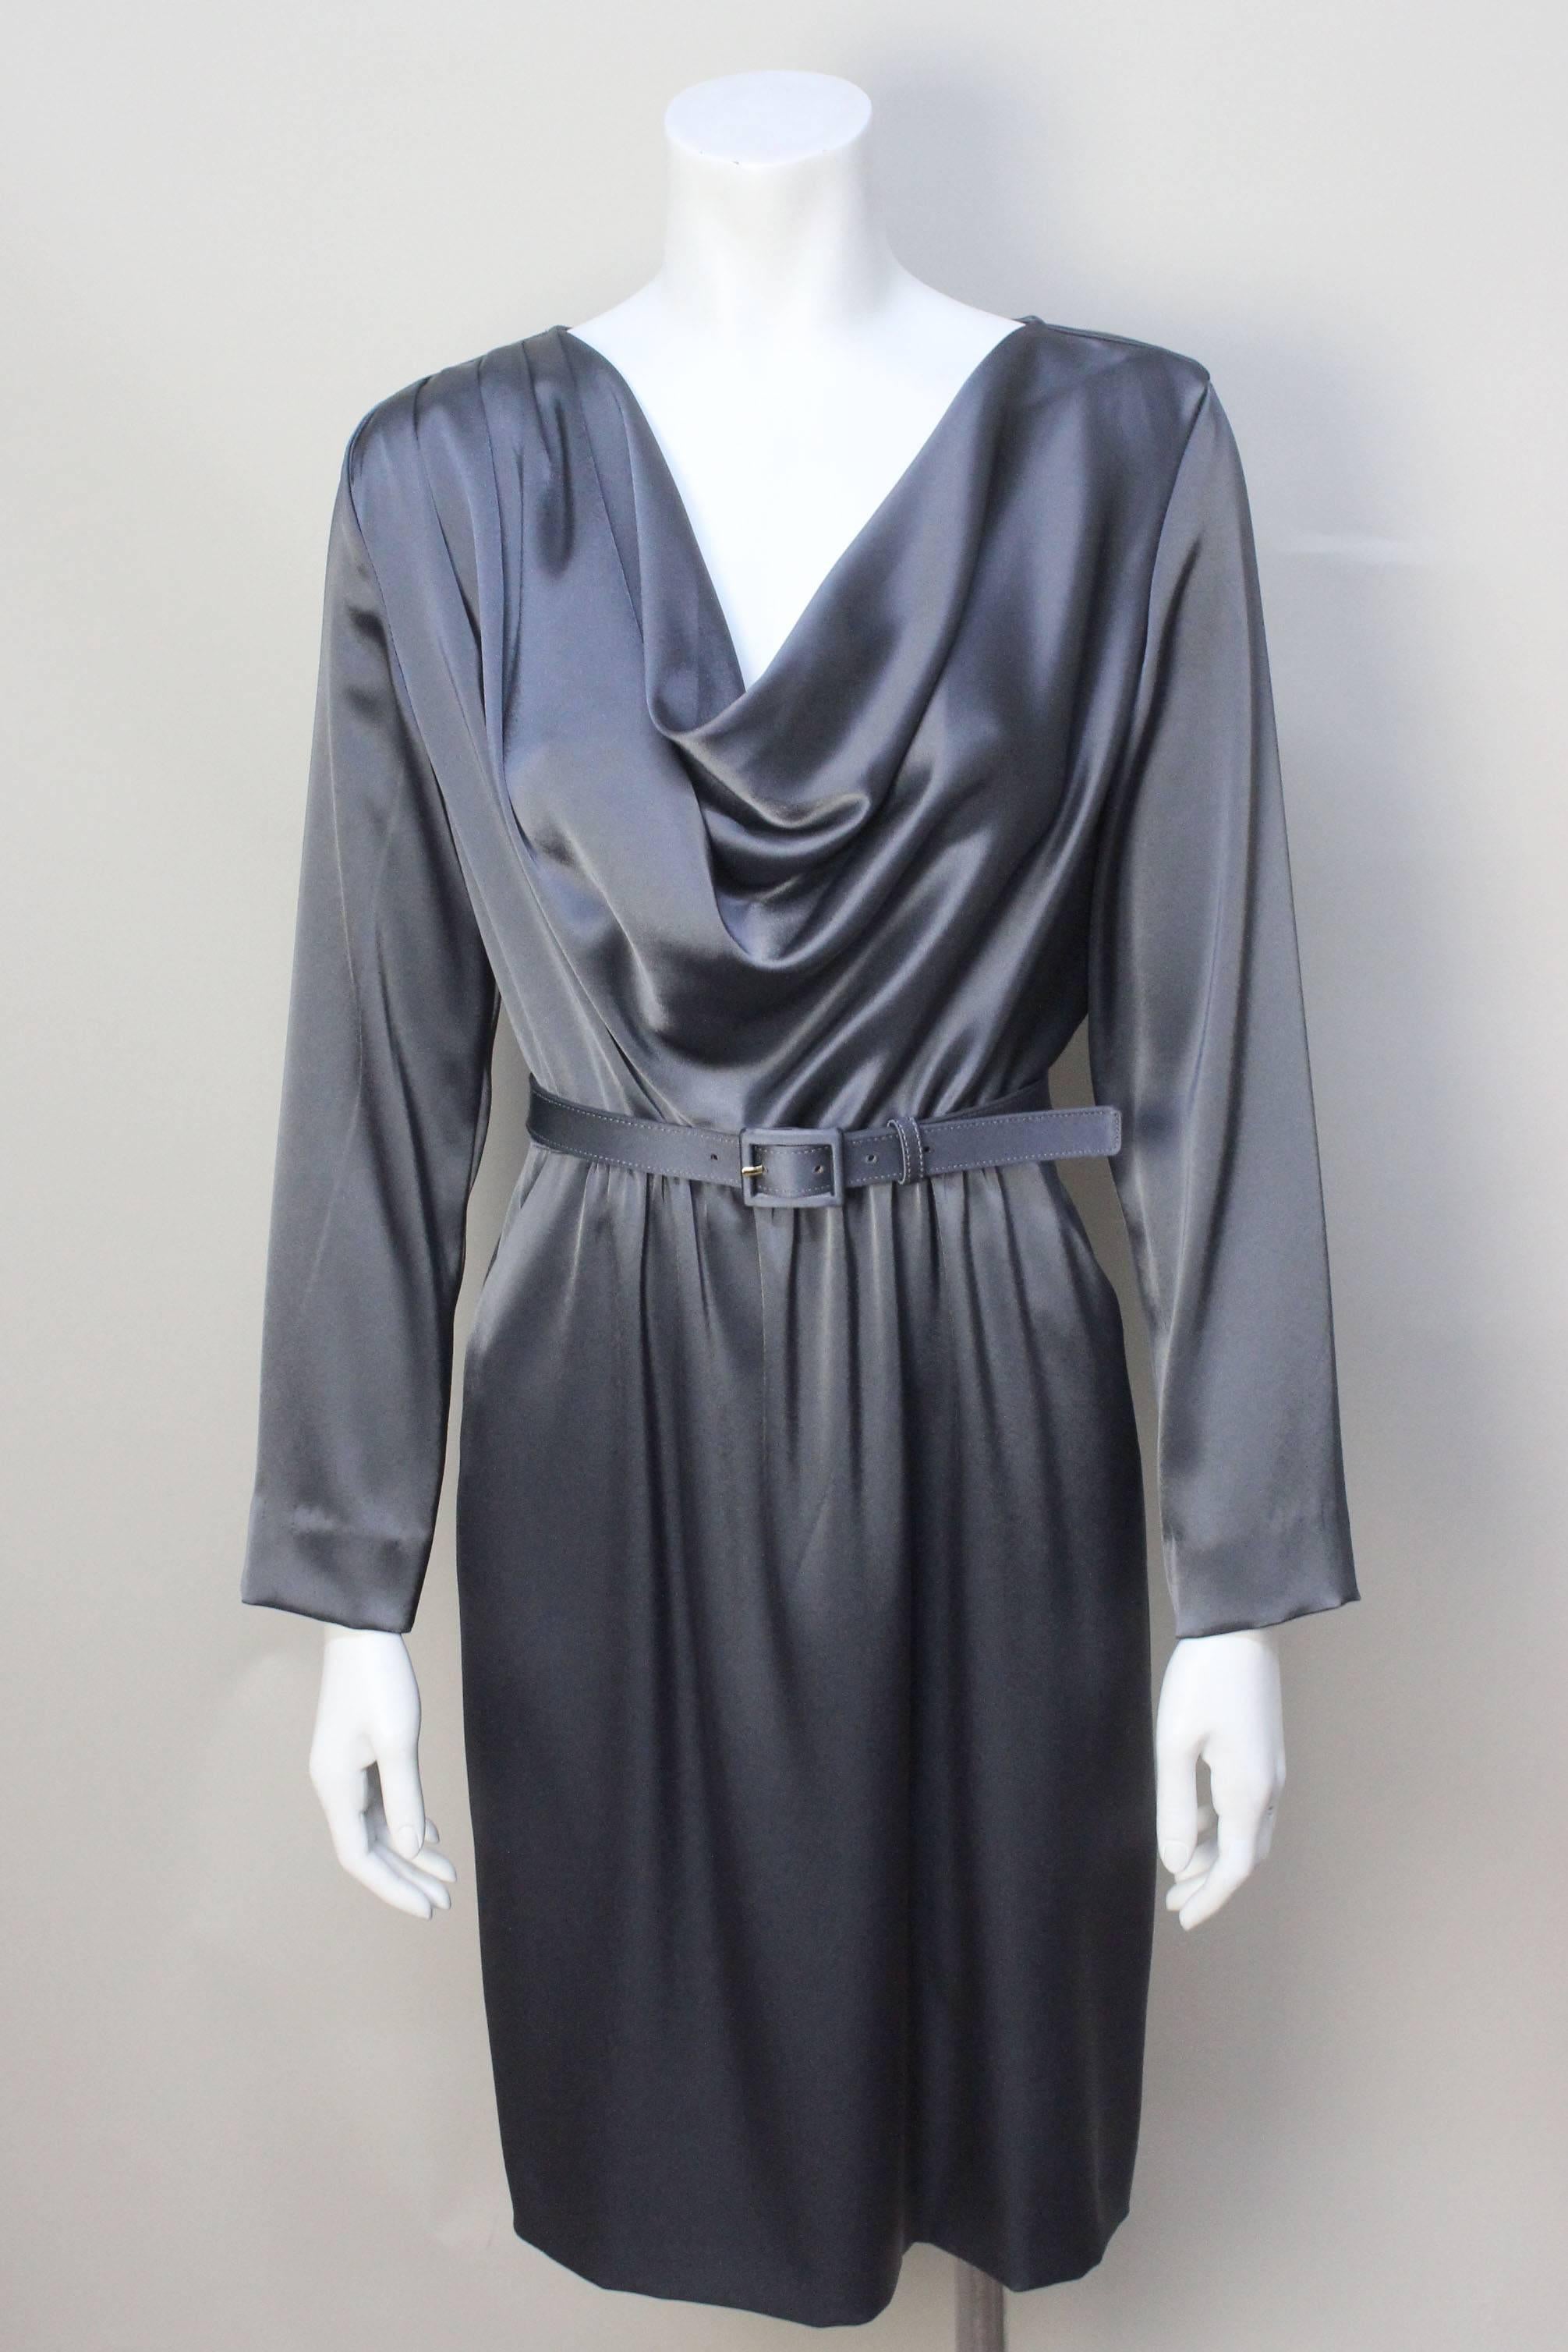 This elegant St. Johns dress drapes beautifully on the body. A deep cowl neck front is weighed on the inside to hang perfectly. The acetate blend feels like the softest silk. The dress gathers slightly at the waist and is cinched with a matching